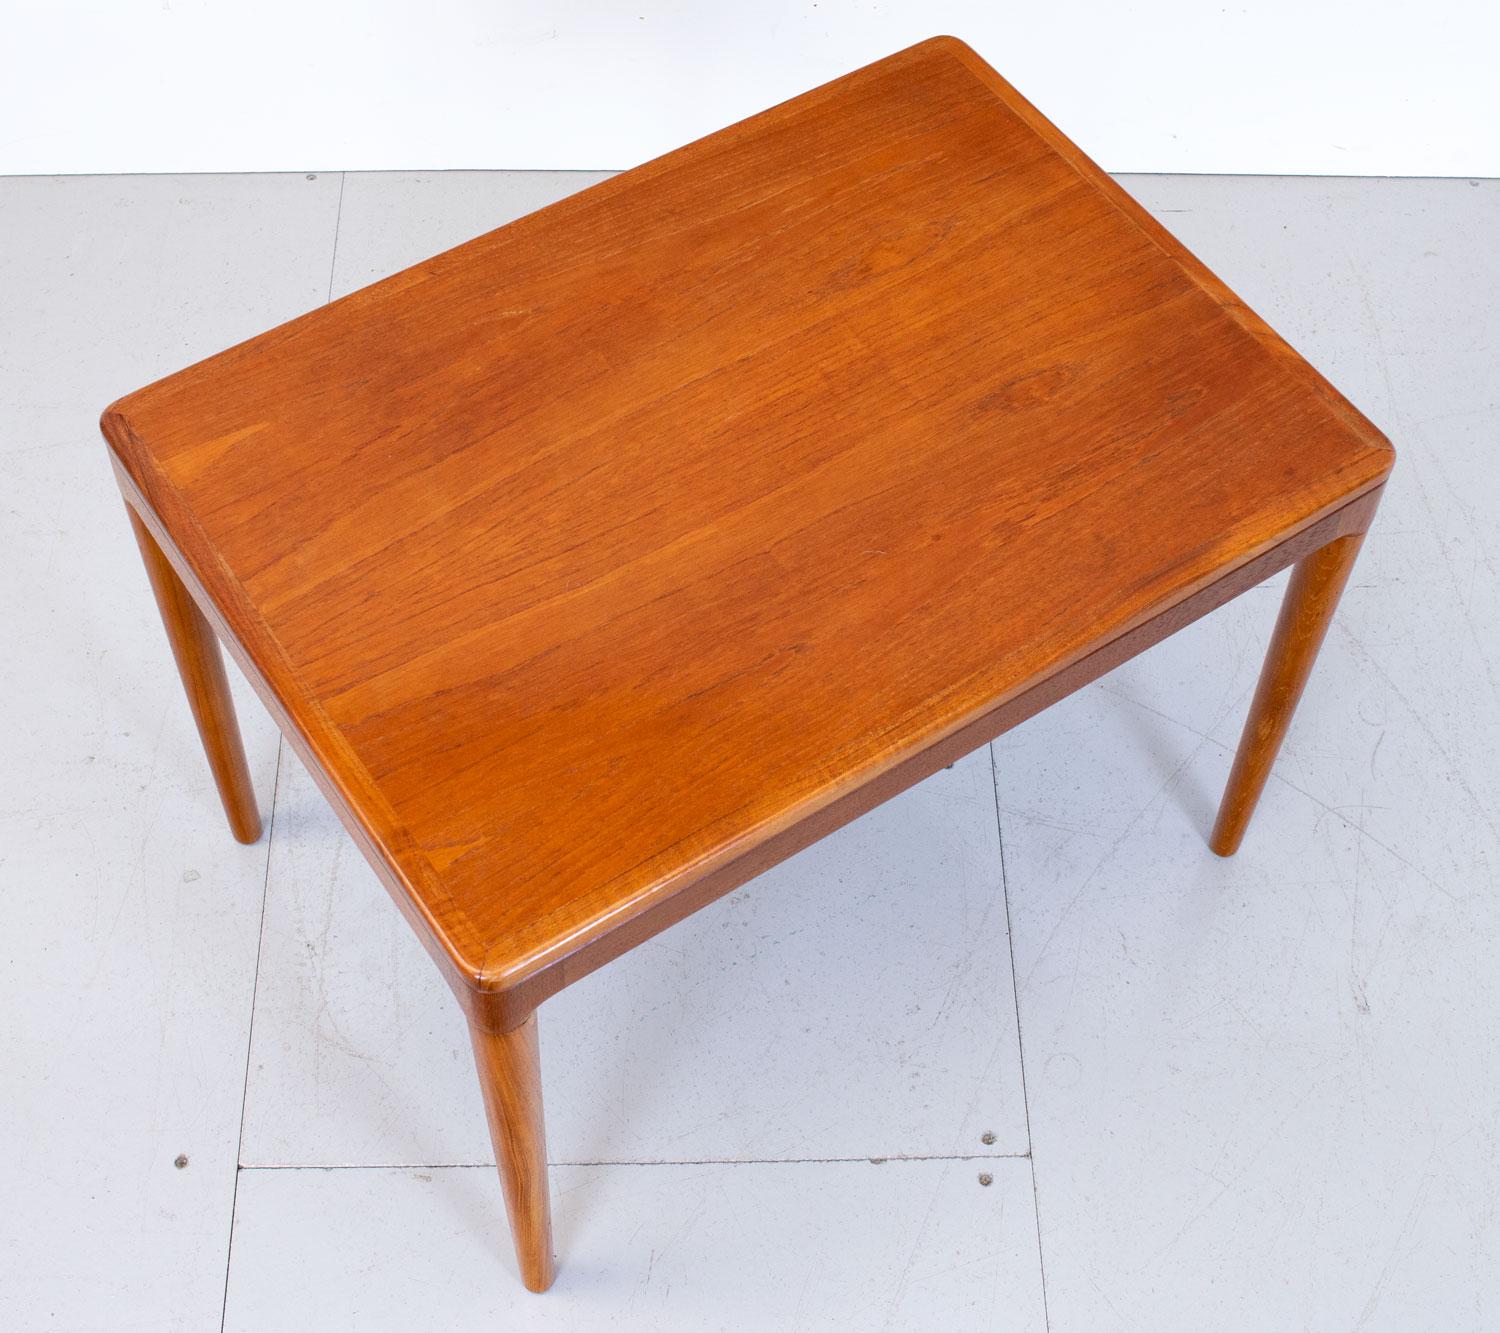 1960s Danish teak rectangular coffee/side table by Arne Hovmand-Olsen for Mogens Kold.
The legs unscrew and it can be flat packed for easy shipping.